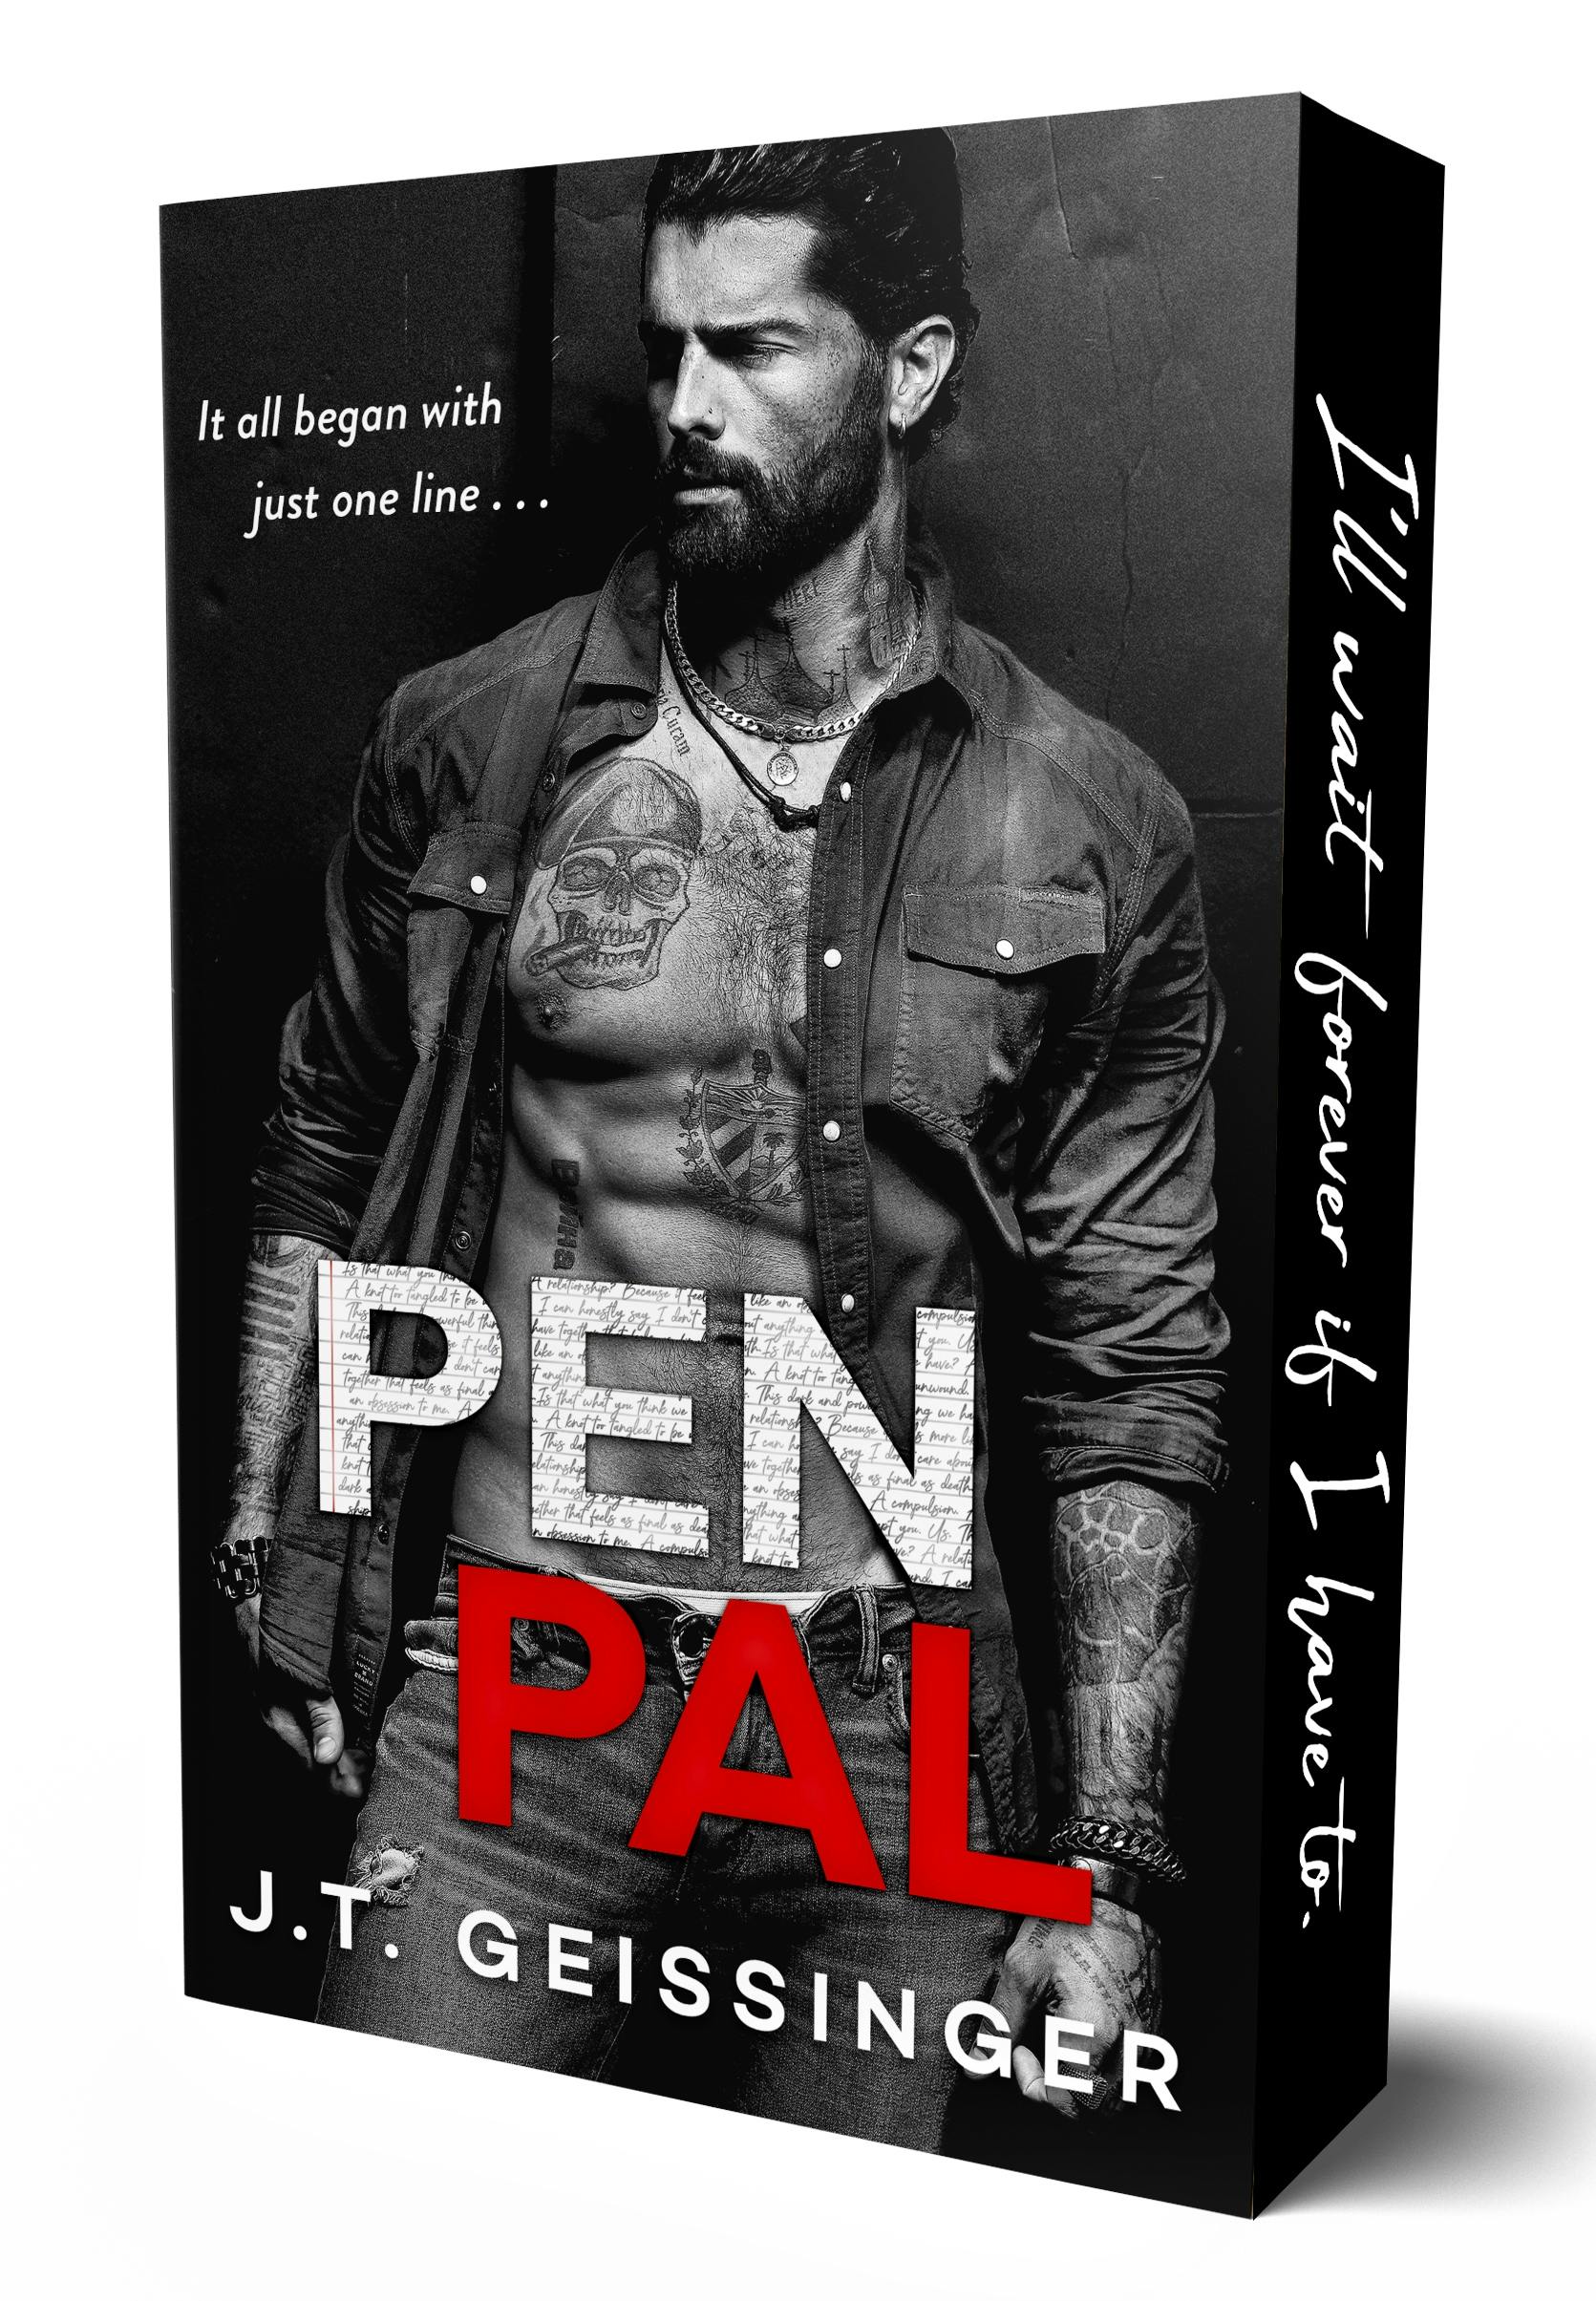 Cover for the book titled as: Pen Pal